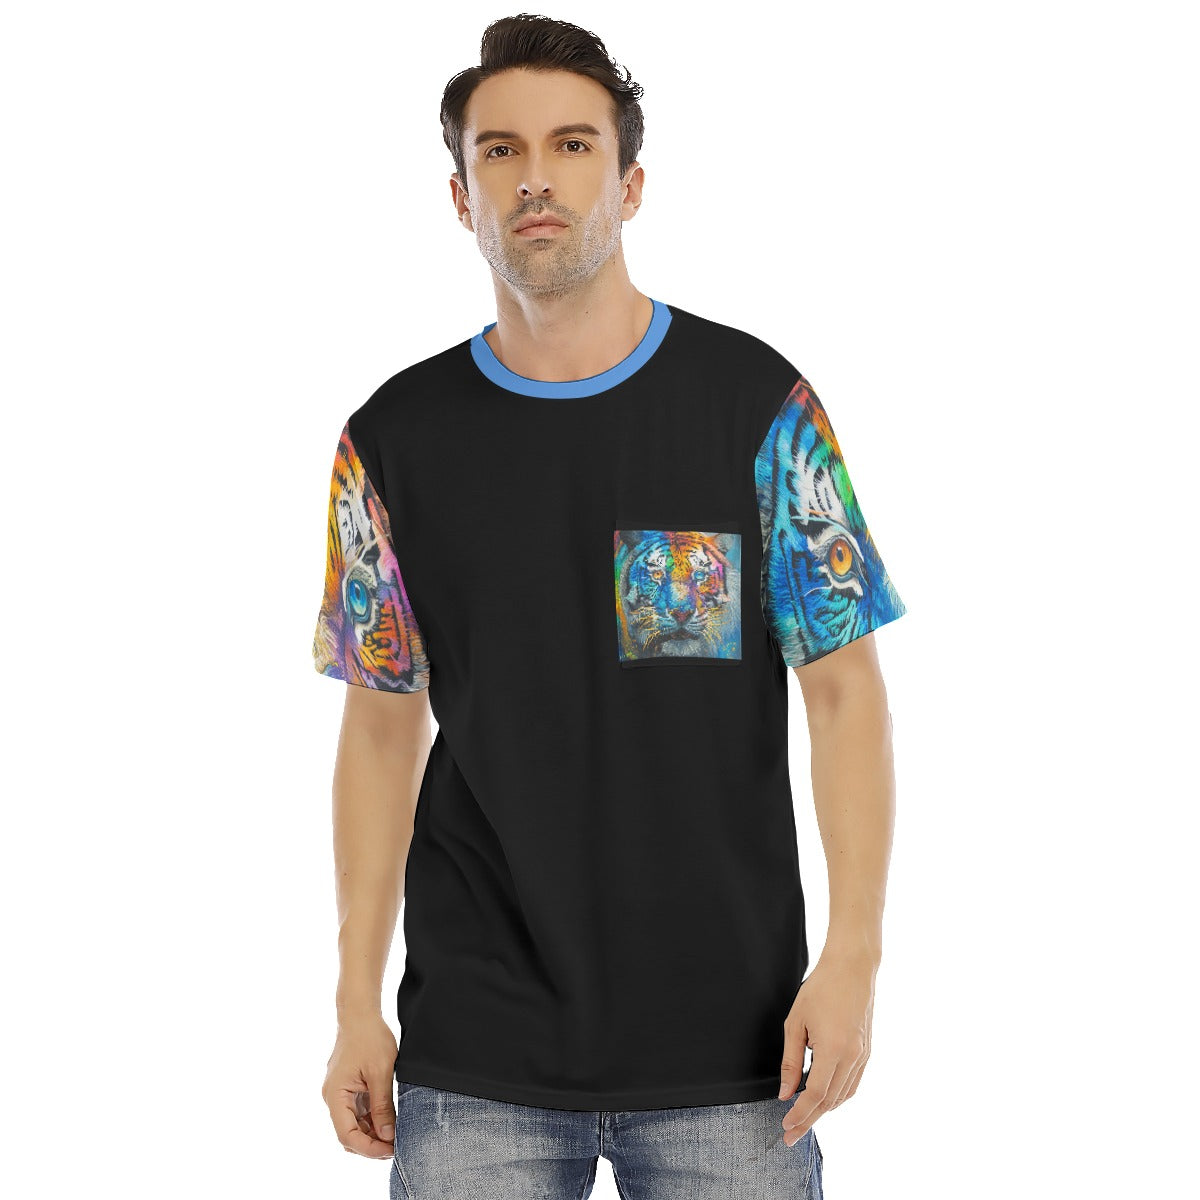 All-Over Print Gender Neutral Short Sleeve T-shirt With Chest Pocket